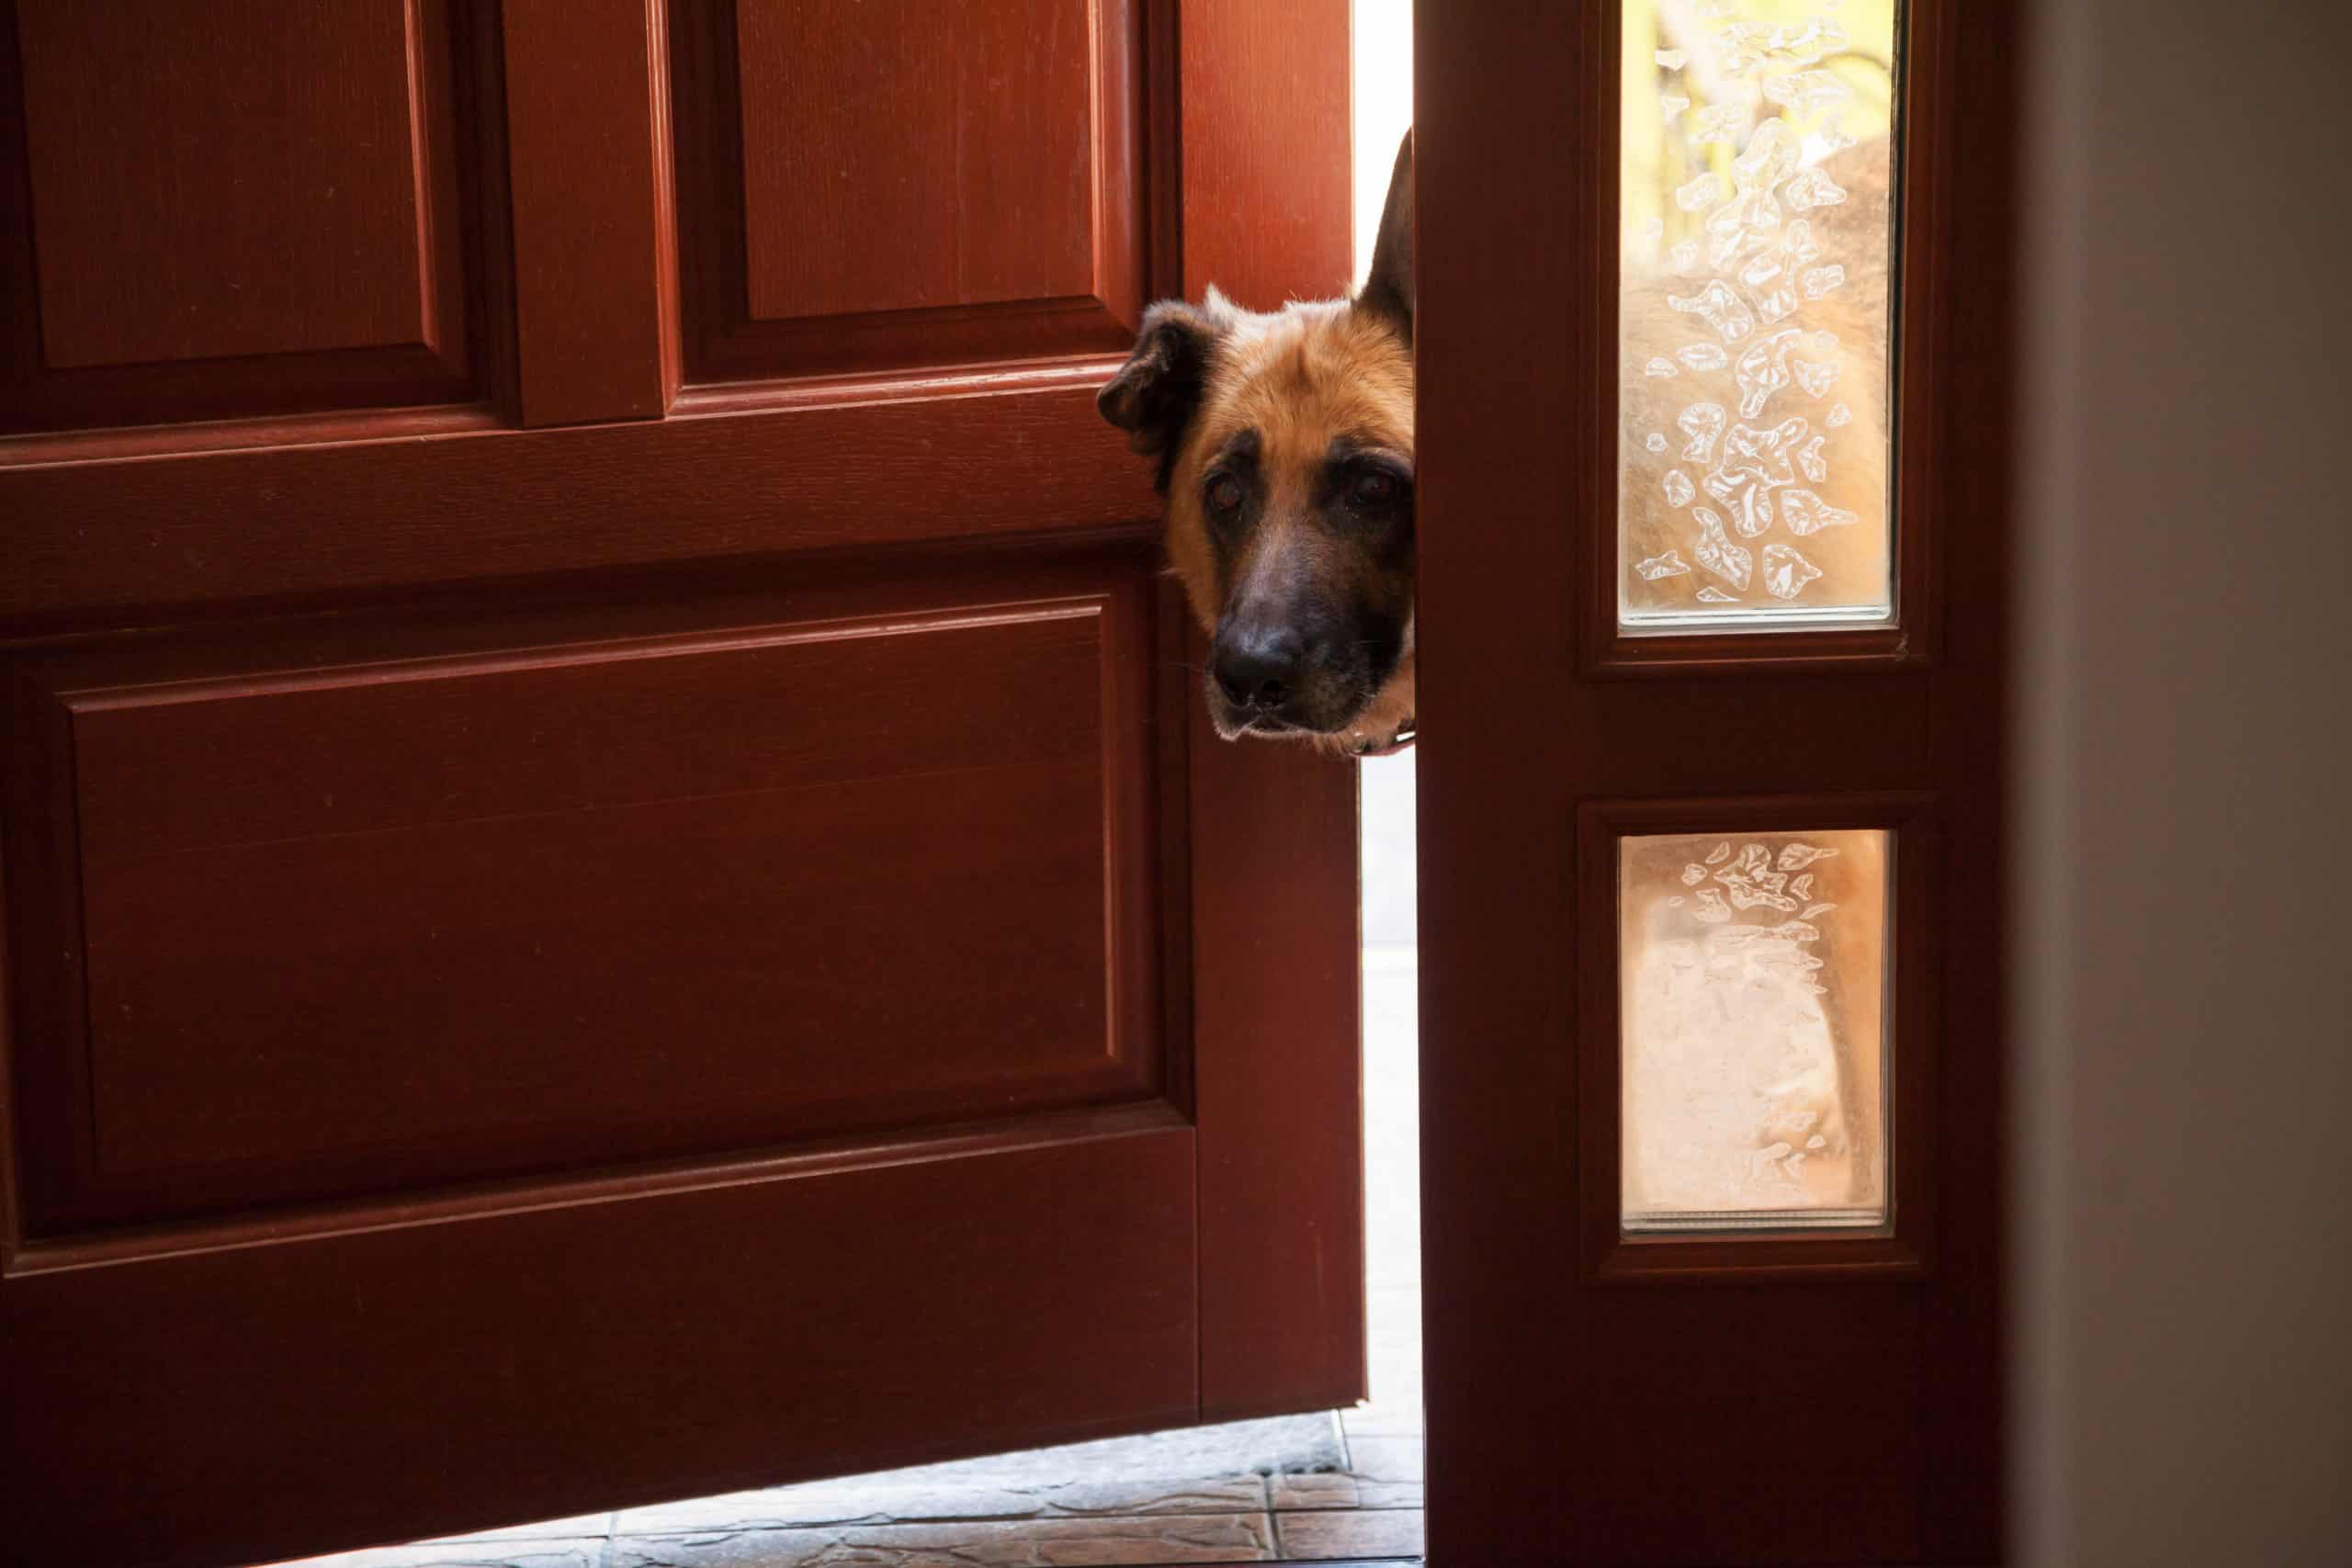 Why won’t my dog let me close the door?